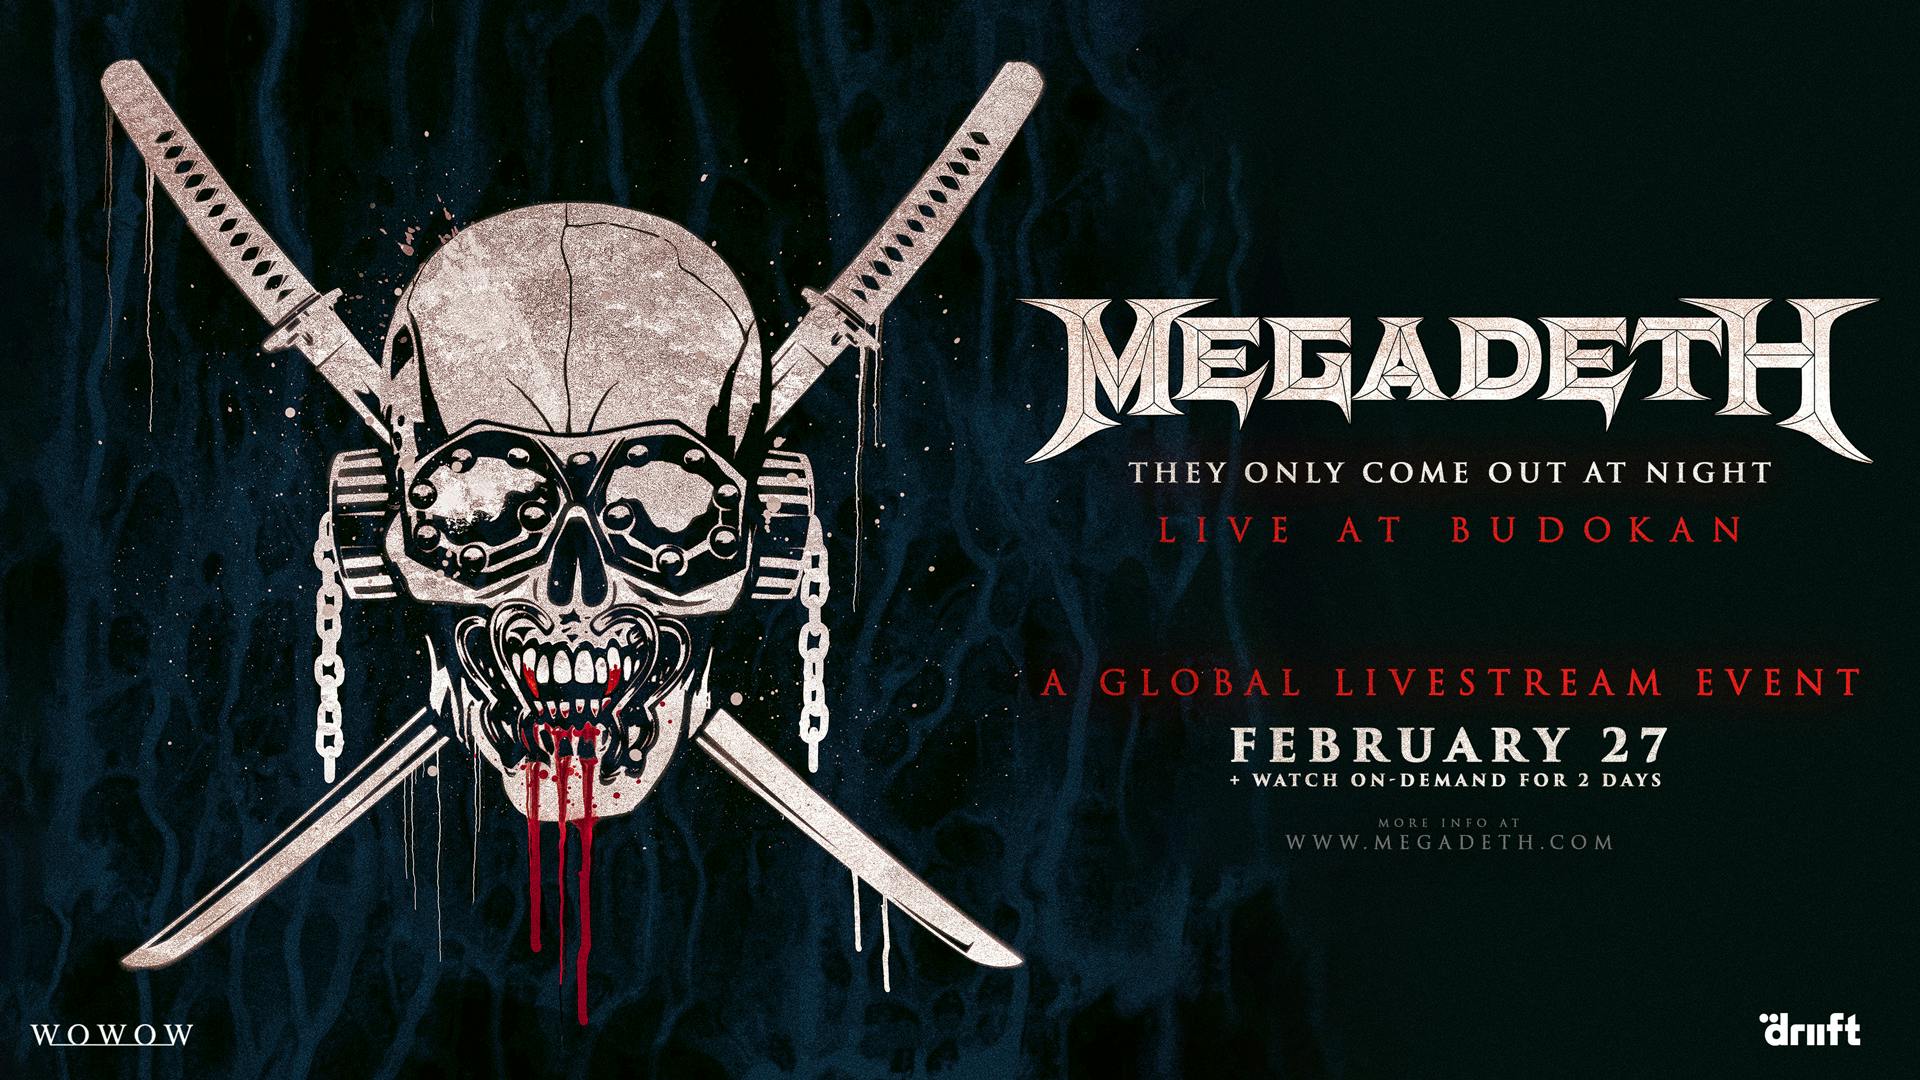 Megadeth: "They Only Come Out At Night" - Live at Budokan - Live in concert on DREAMSTAGE - February 27"